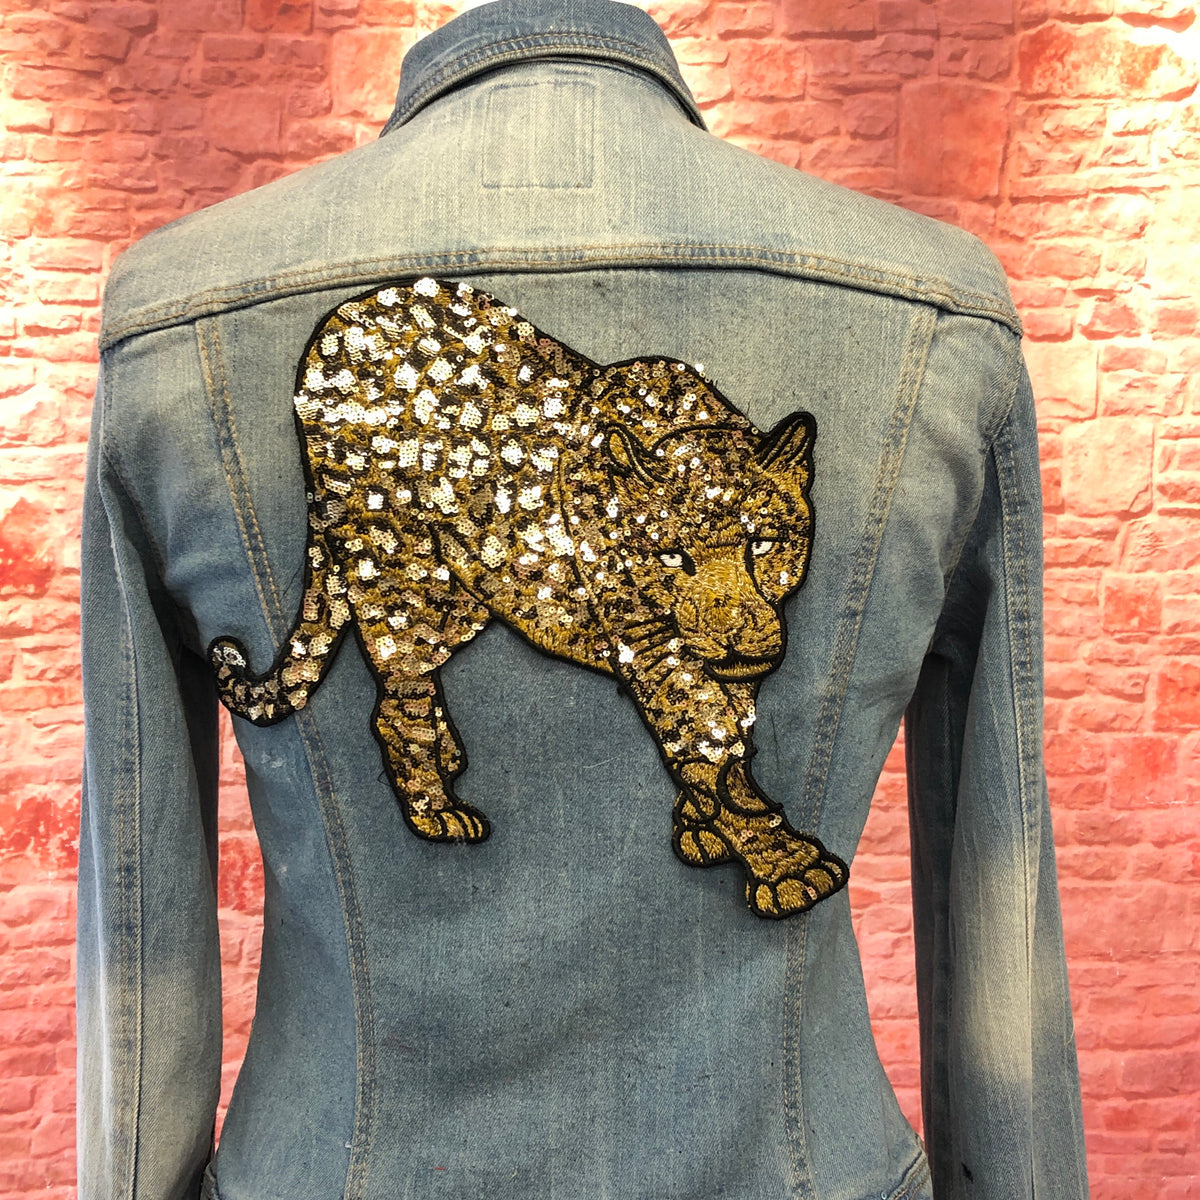 Embroidered leopard patch (pairs only) – SewLaDiDaVintage